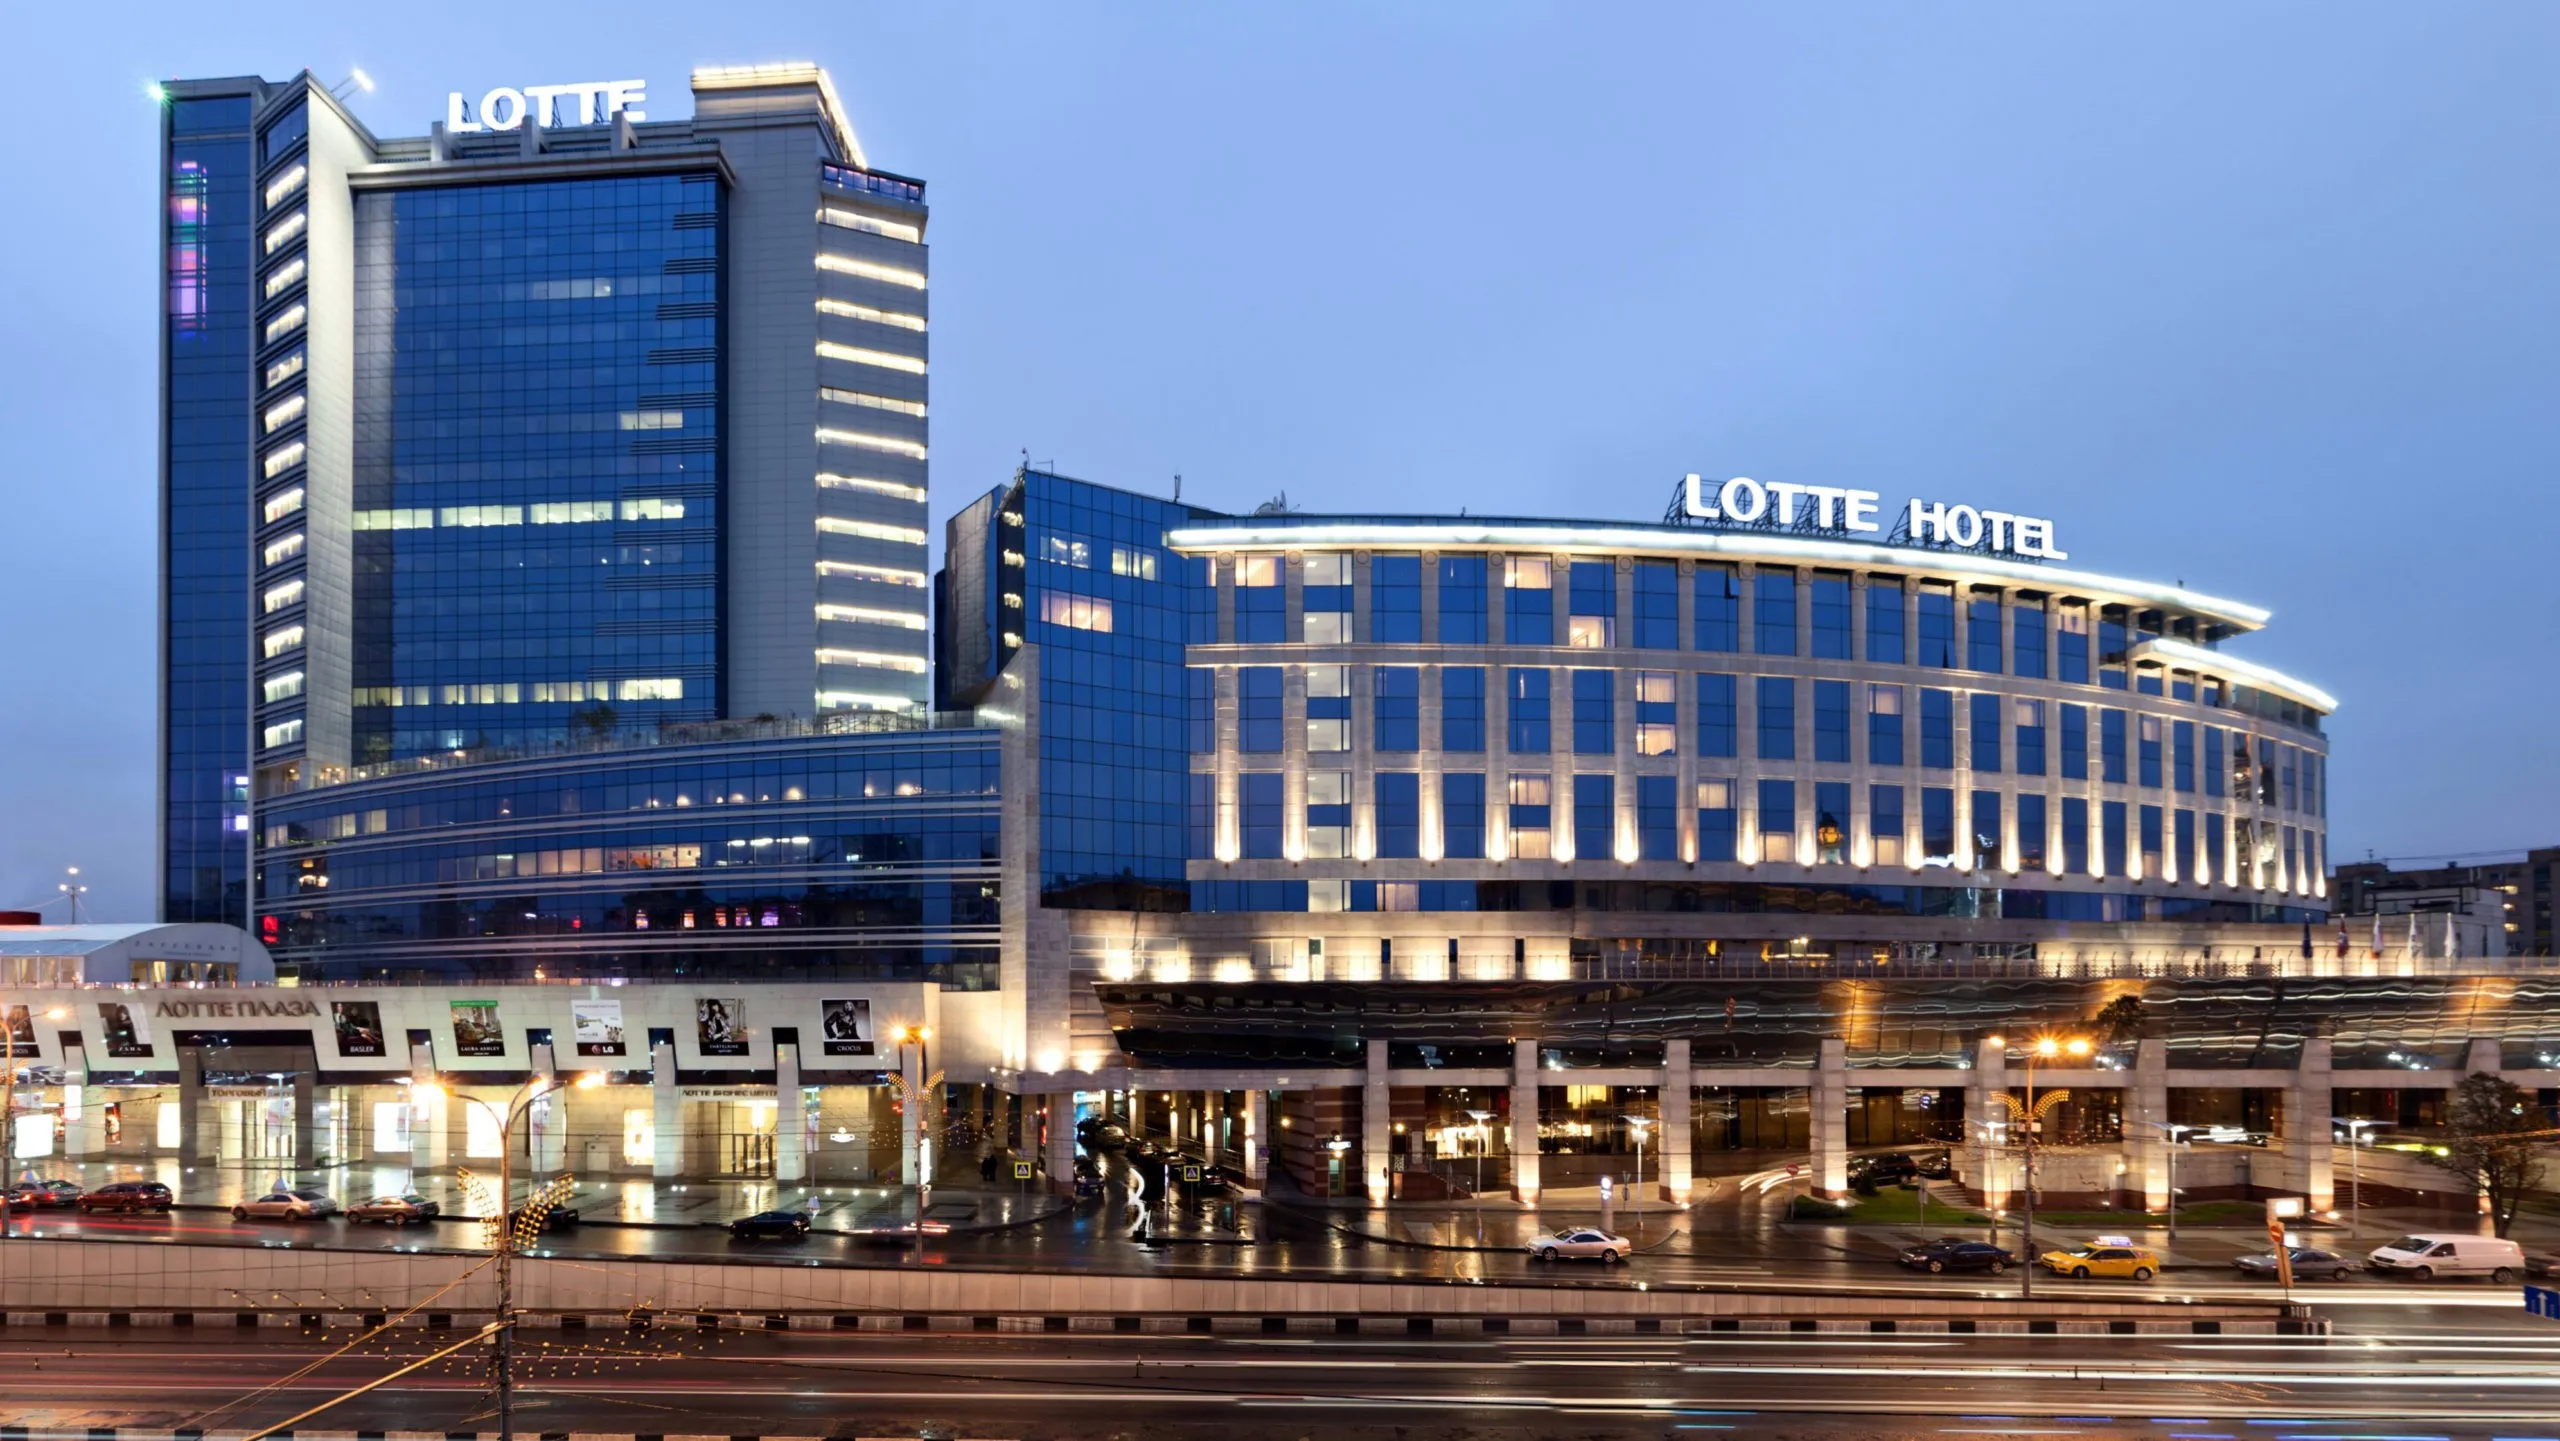 Lotte Plaza in Russia, europe | Handbags,Shoes,Accessories,Clothes,Gifts,Cosmetics,Sportswear - Country Helper